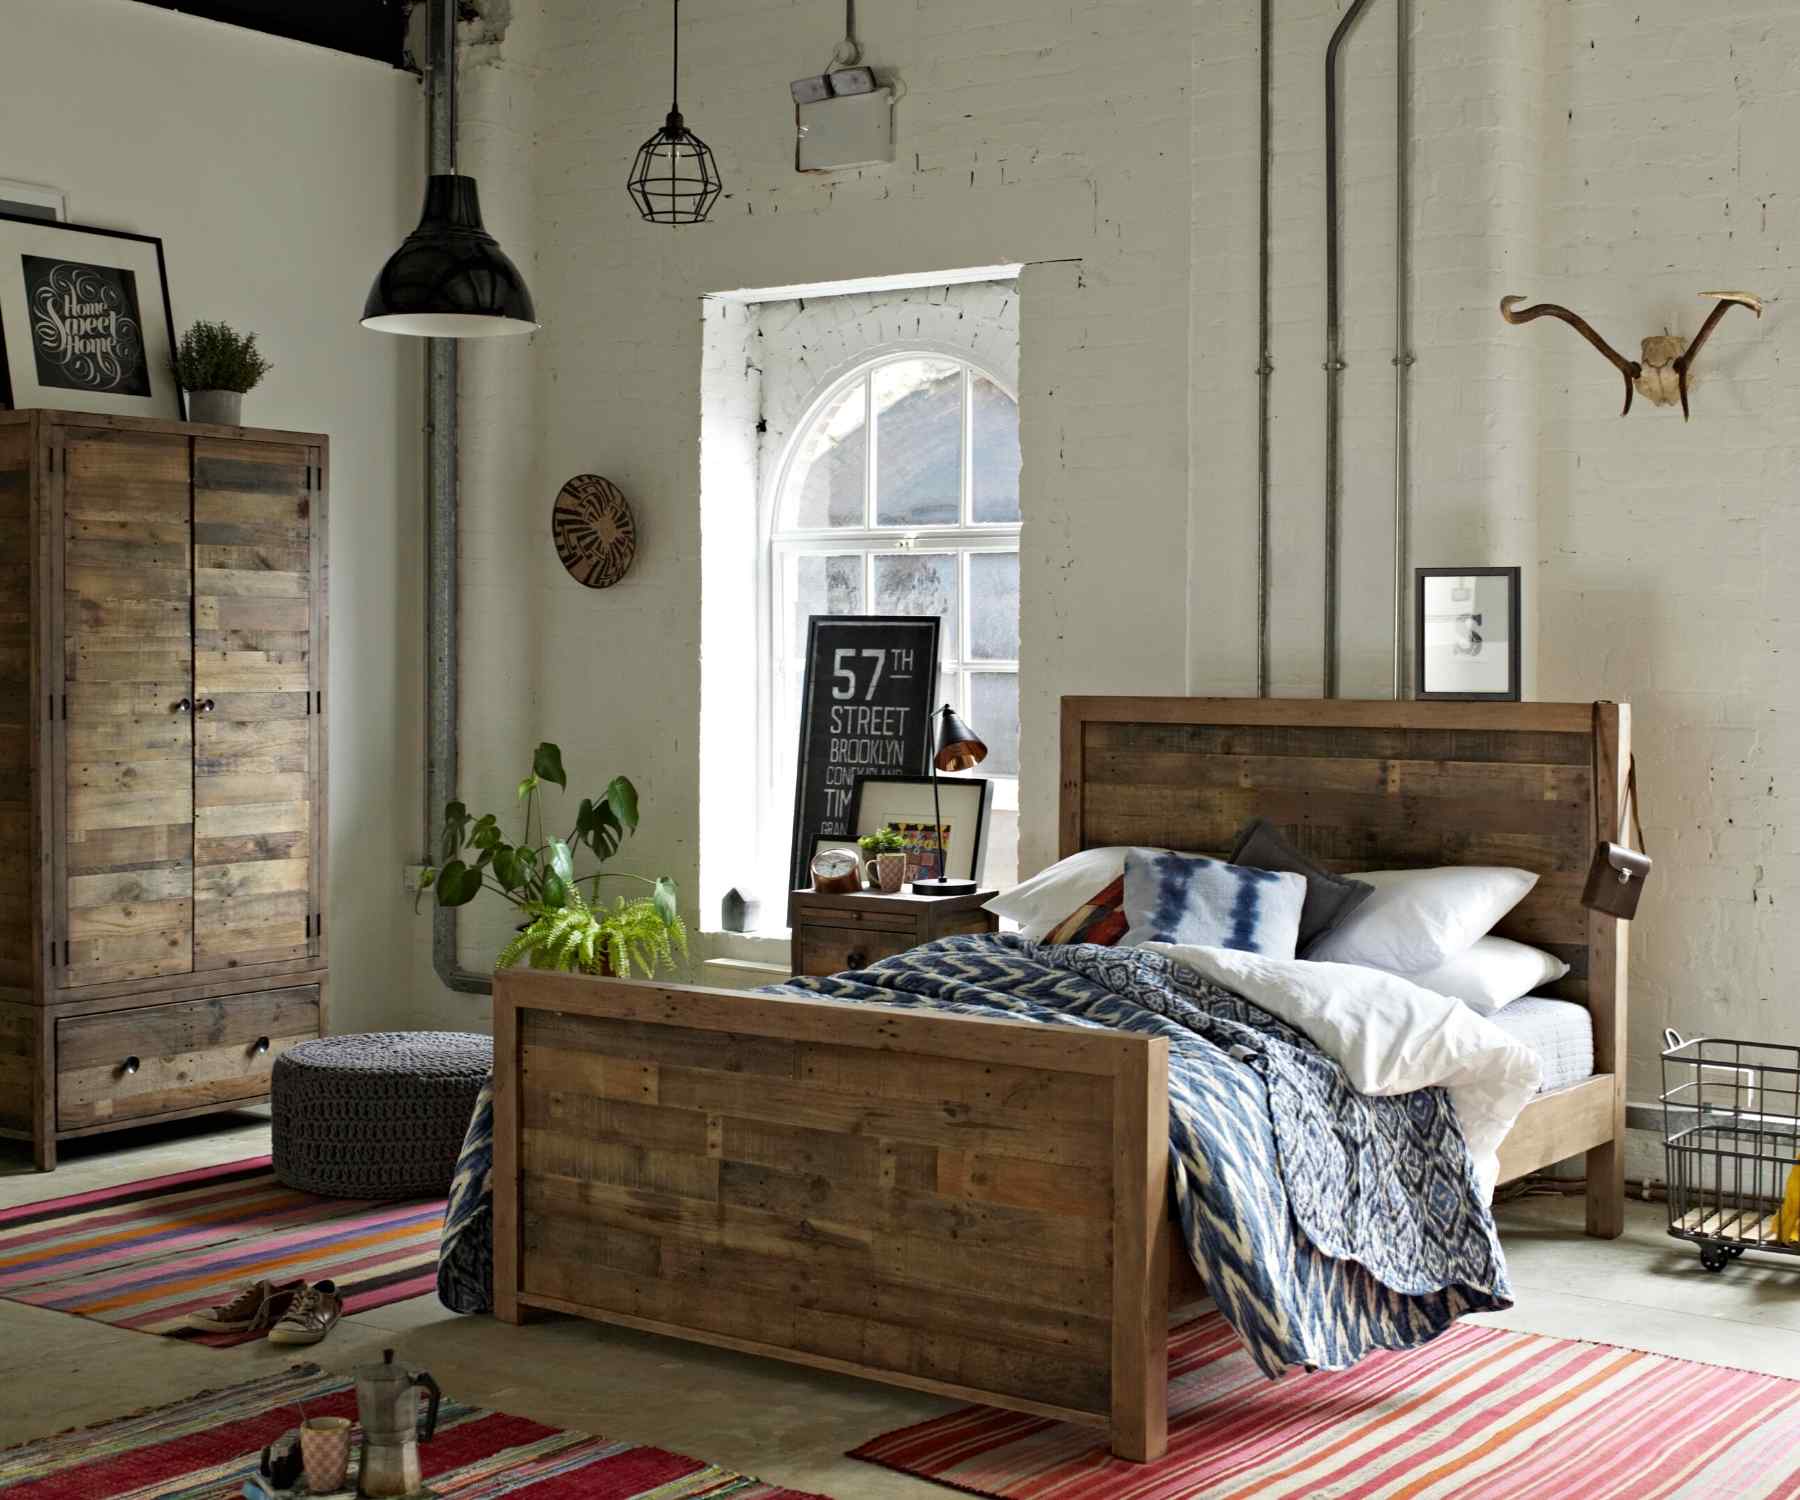 Reclaimed wood bed in bedroom with matching wardrobe